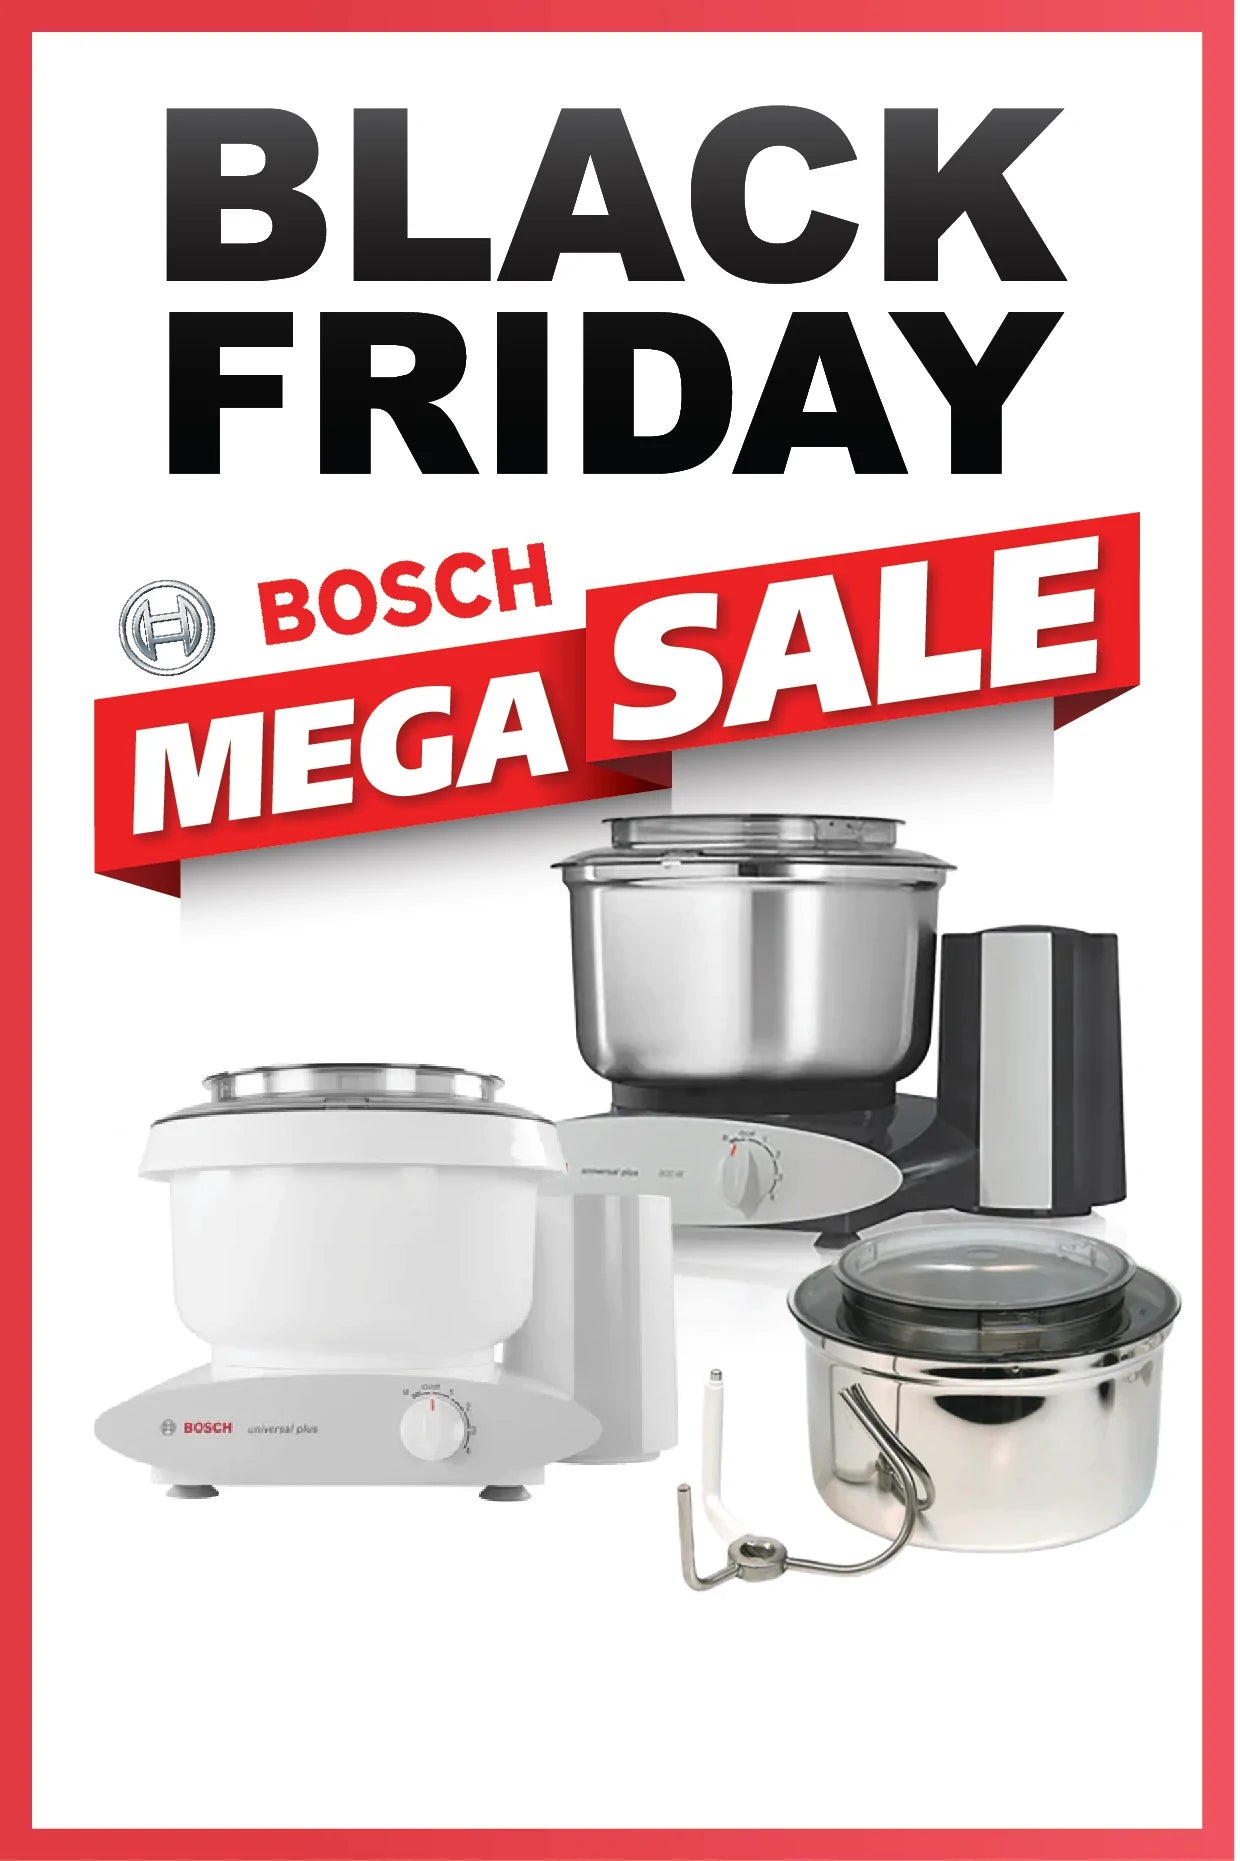 Bosch Universal Plus Mixer with stainless steel bowl for challah and s –  Royaluxkitchen